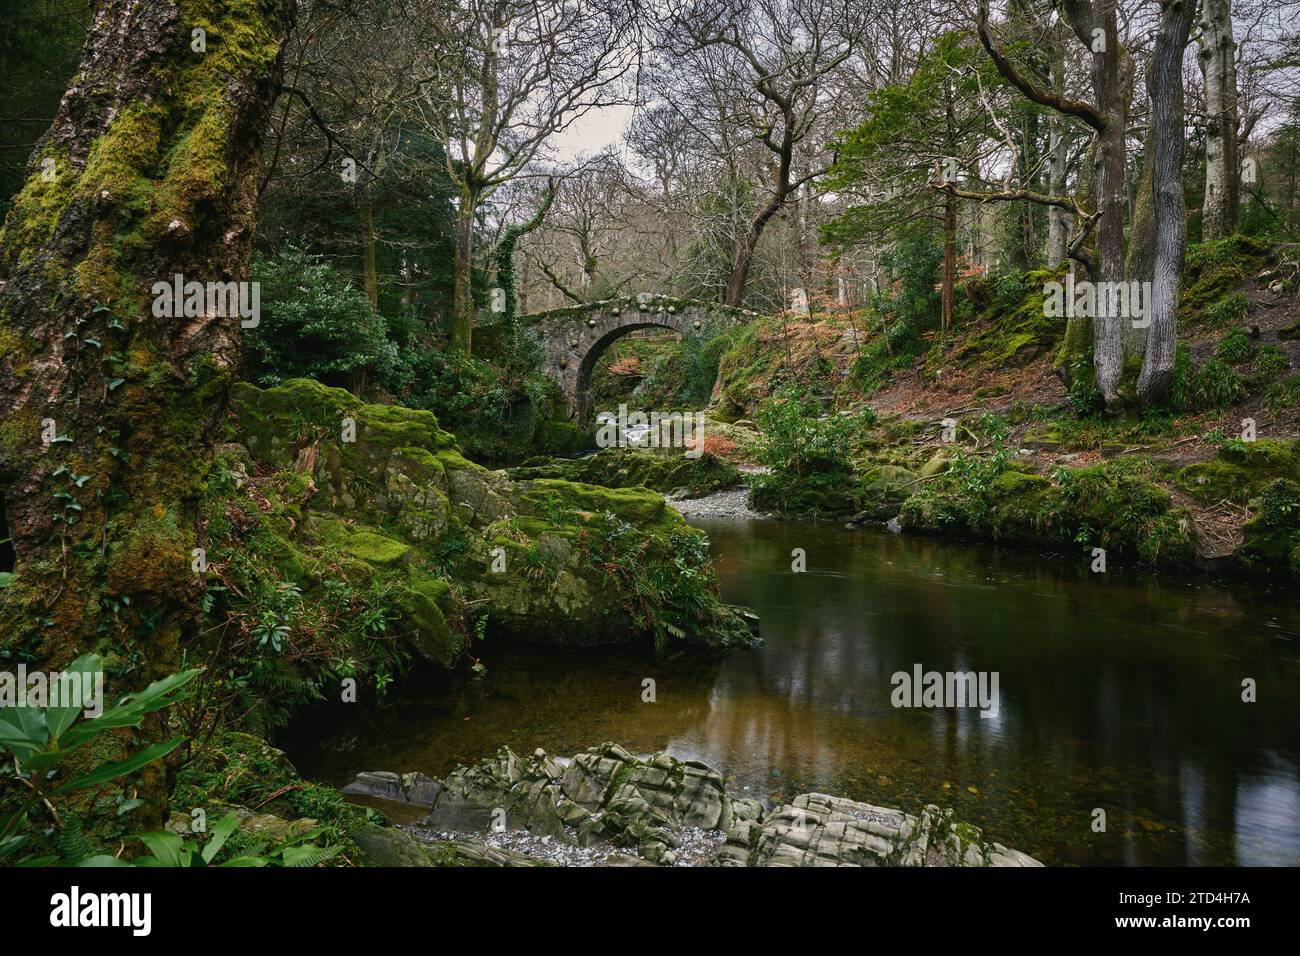 Foley's Bridge in Tollymore Forest Park, County Down, Northern Ireland. This has been featured in many films including Dungeons & Dragons. Stock Photo